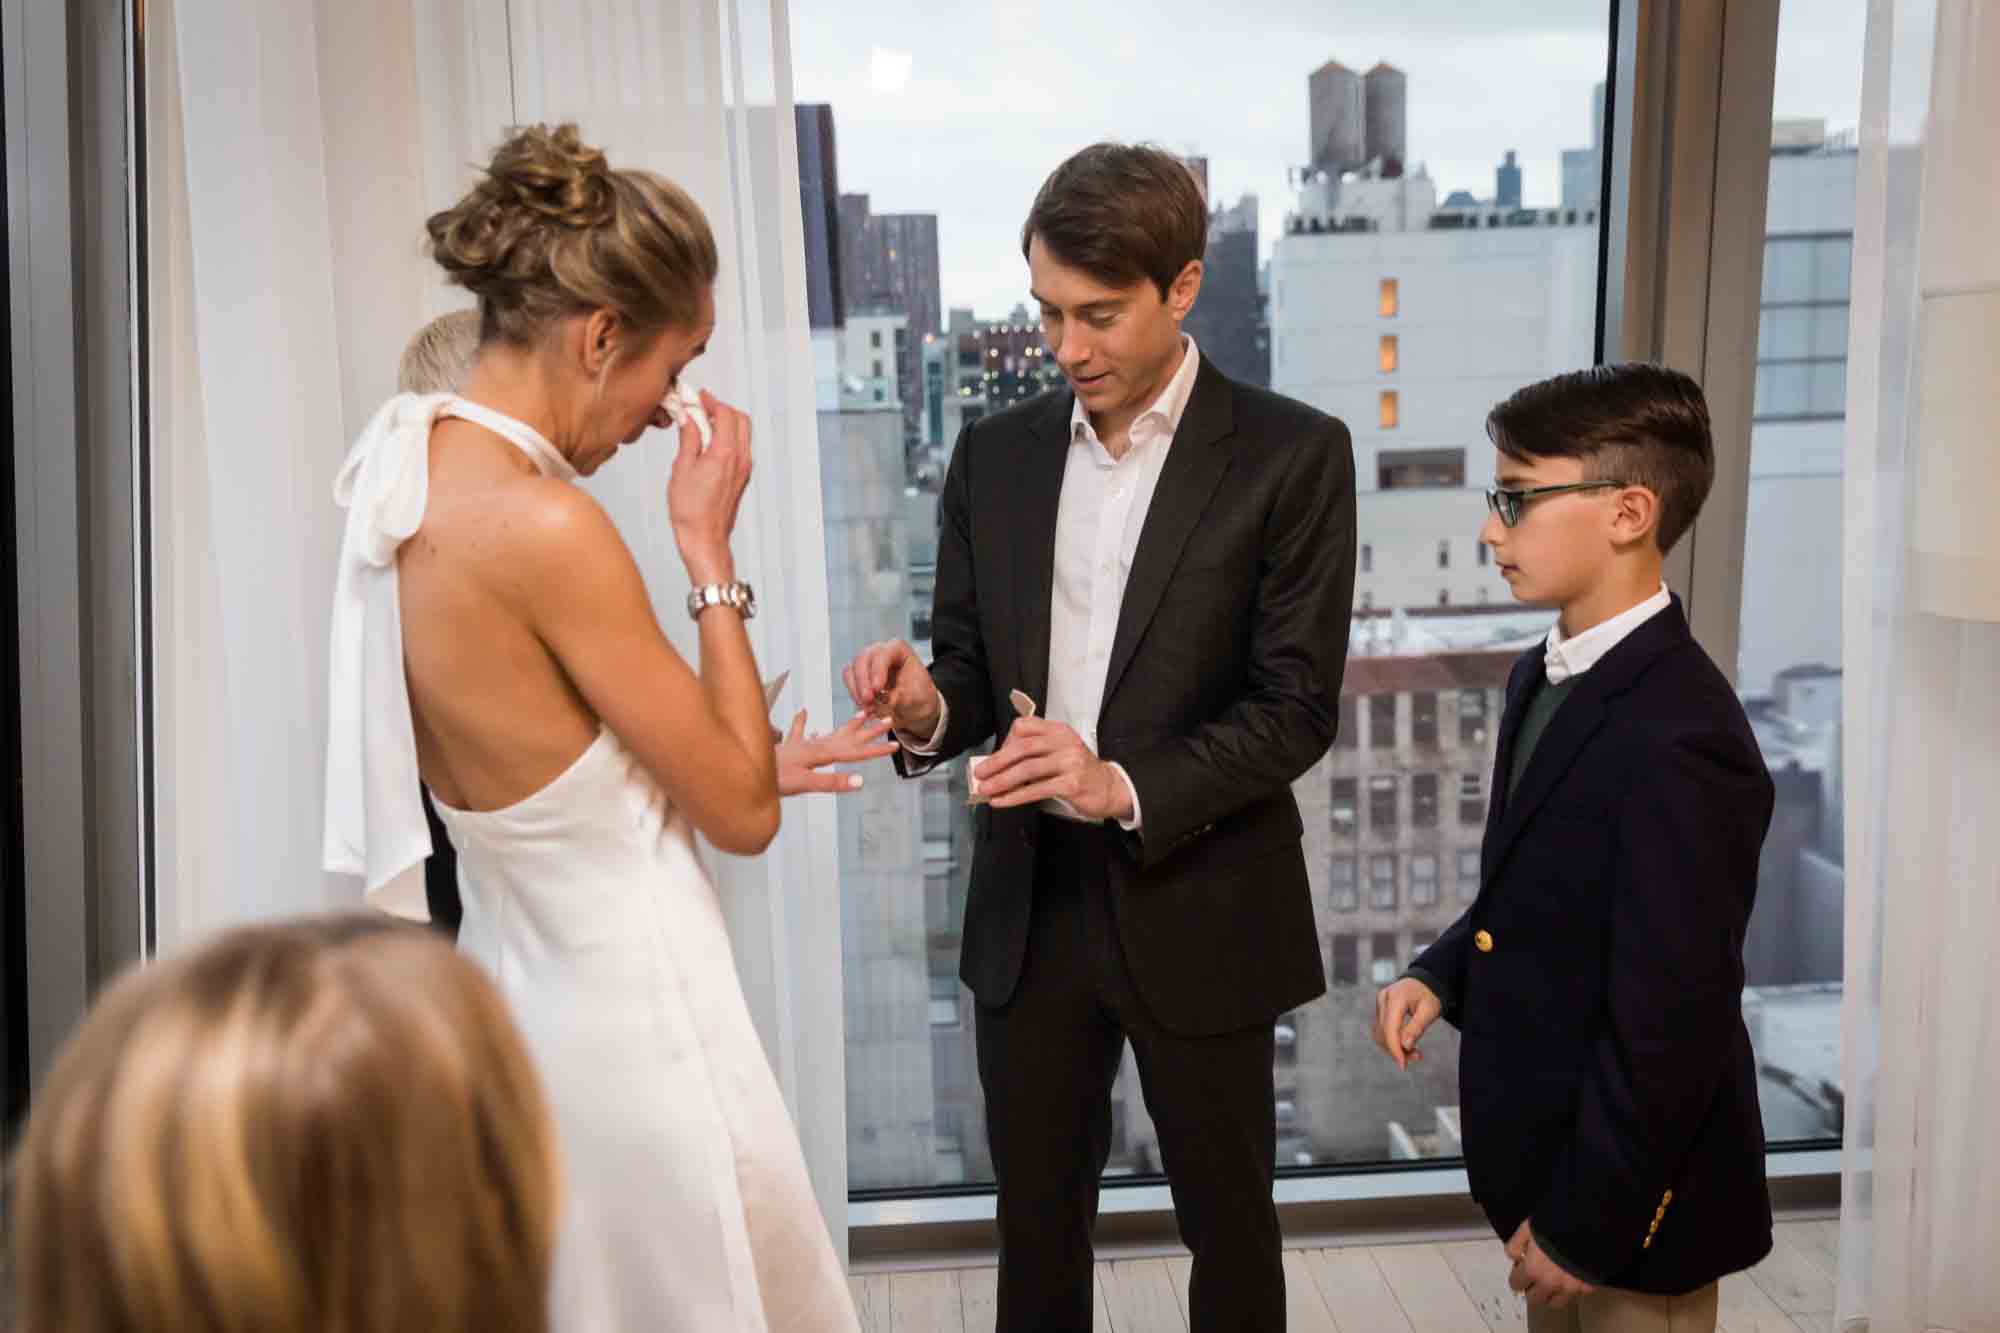 Groom putting ring on bride's finger at a Public Hotel wedding